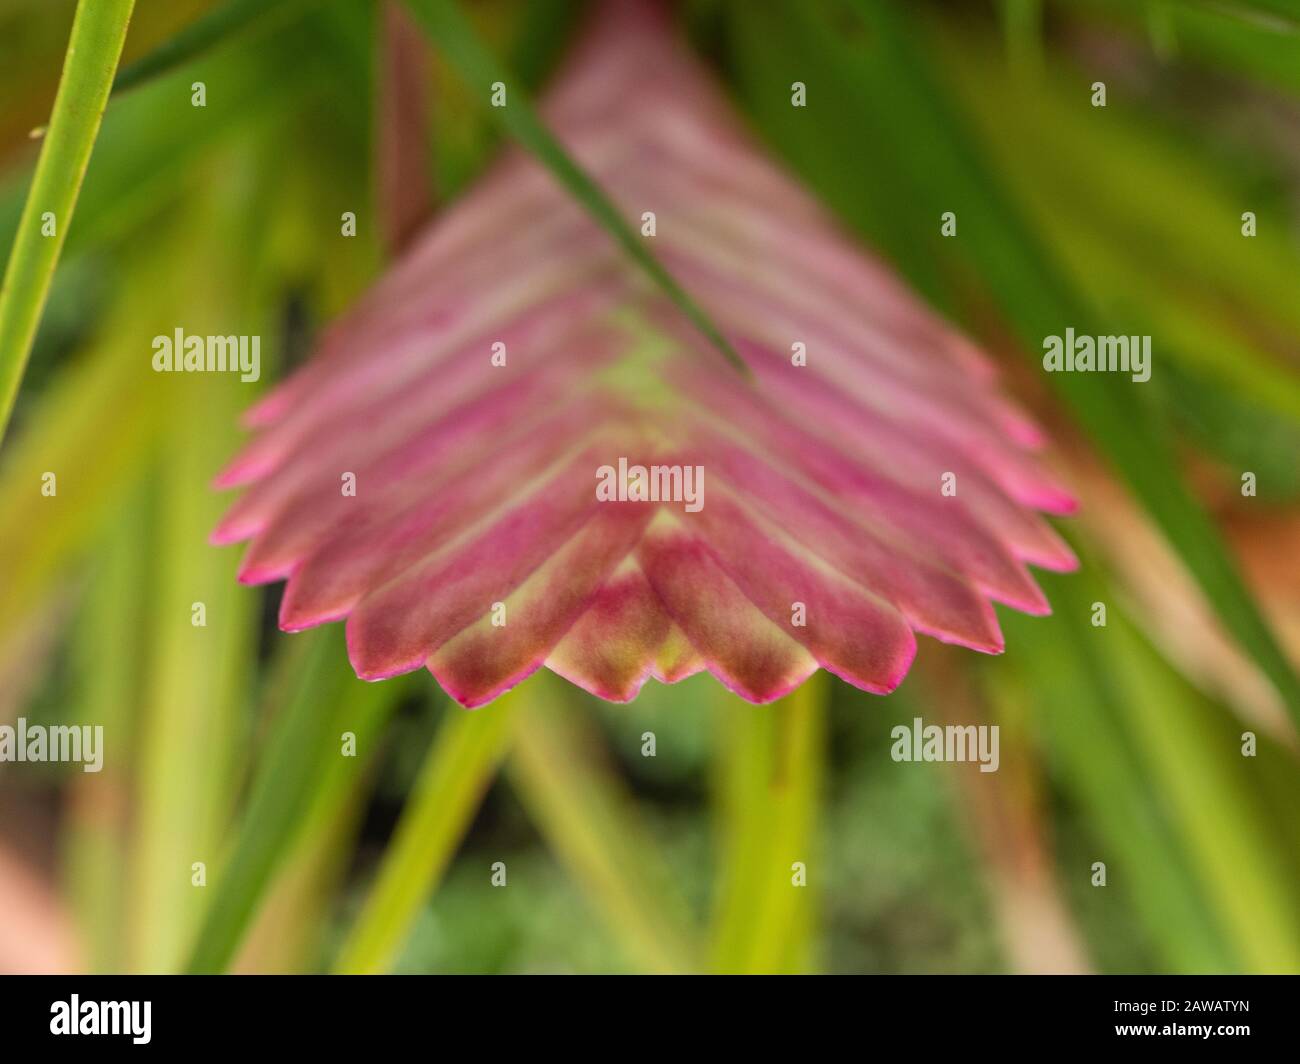 Pink quill plant bract, tillandsia Bromeliad, paddle shaped spikes the flowers will  bloom from and green blade-like leaves, Australian coastal garden Stock Photo